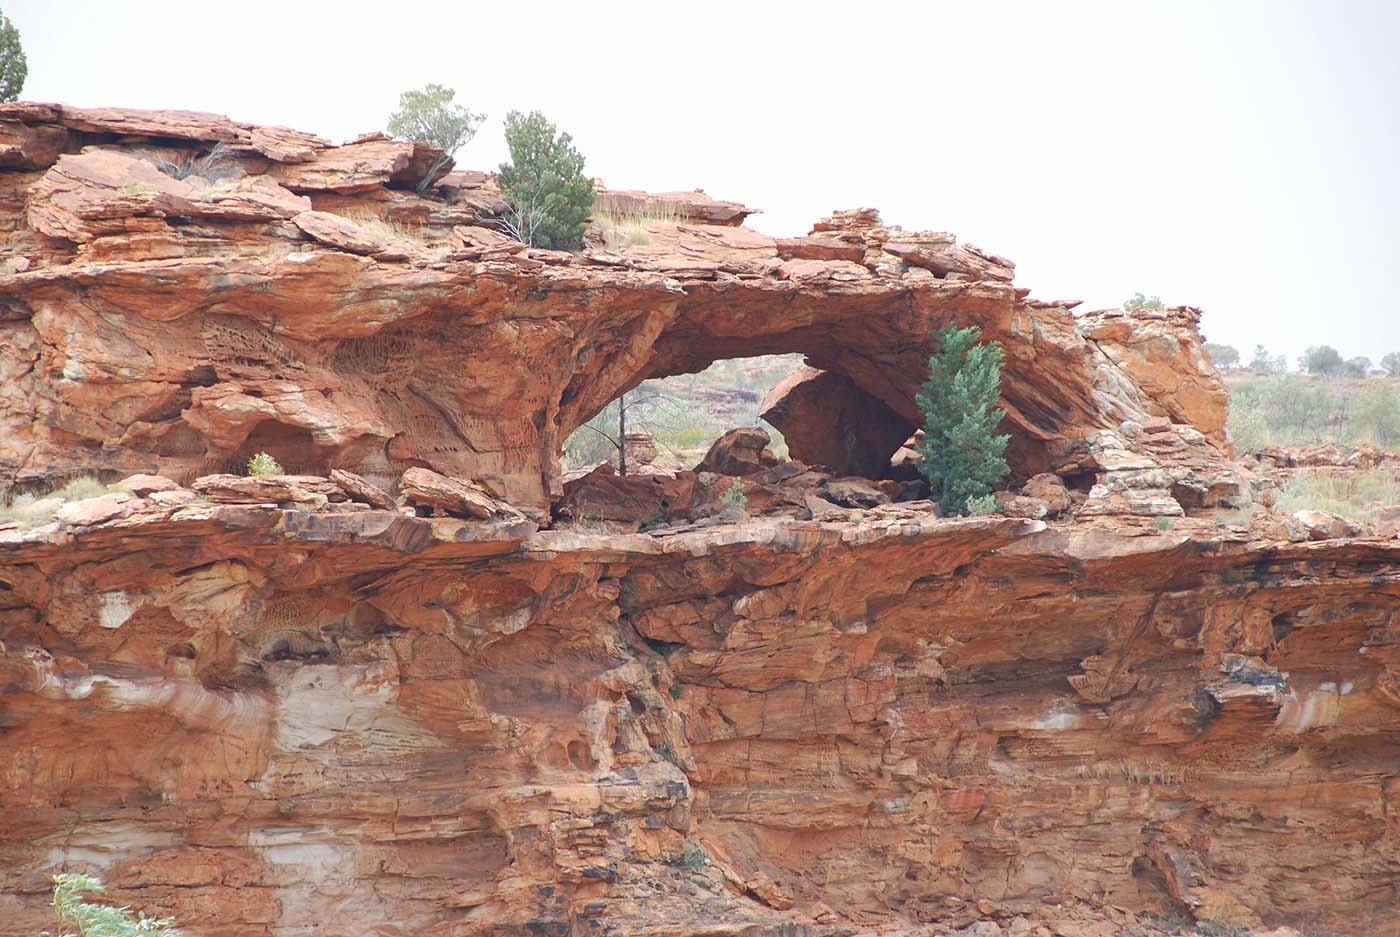 Colour image of a rock with an arch formation.